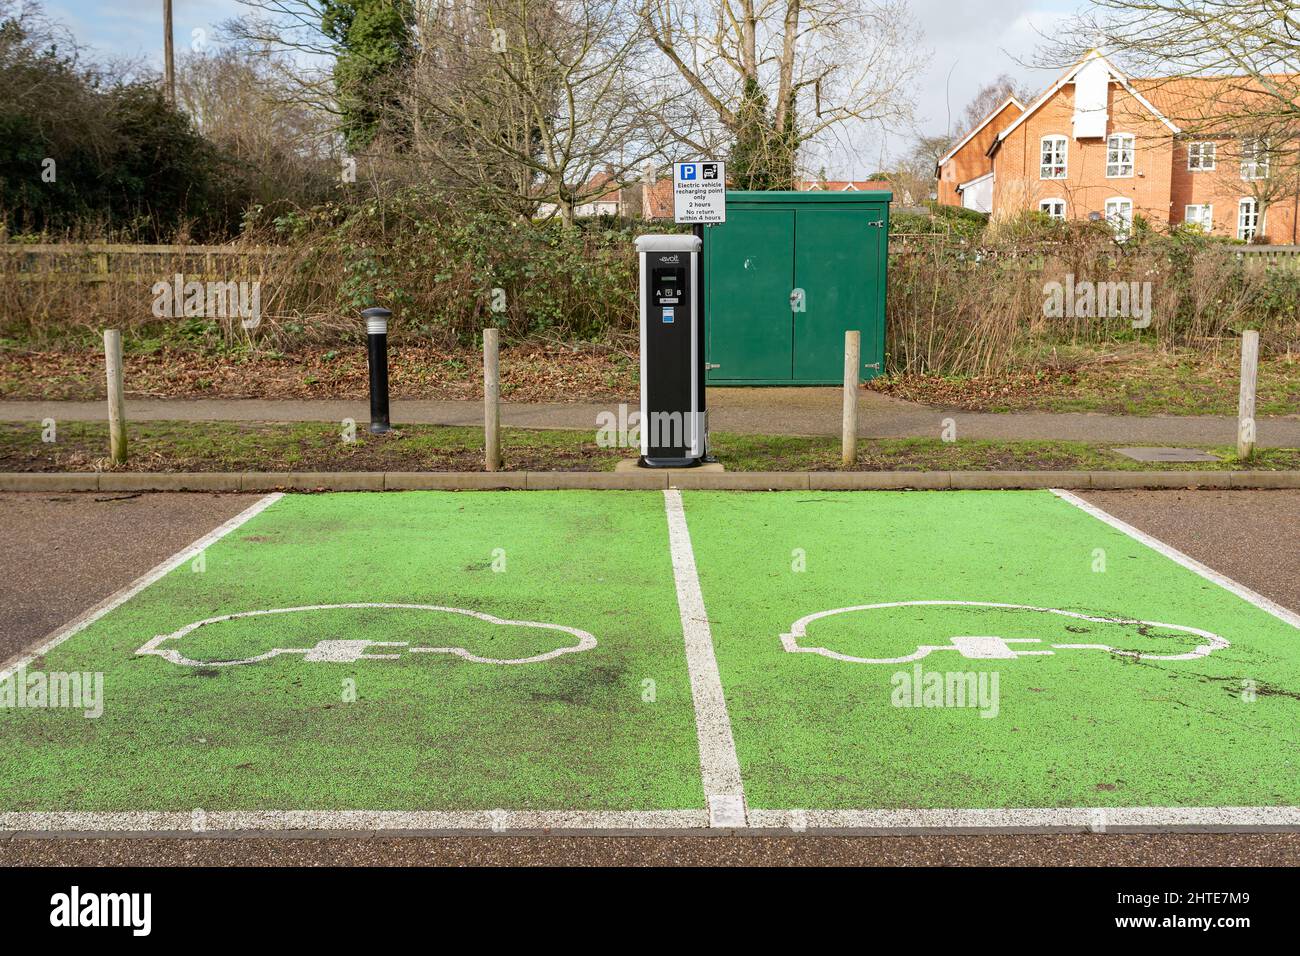 Woodbridge Suffolk UK February 22 2022: Empty green parking bays that are for electric vehicles only. There is a eVolt charging station available for Stock Photo